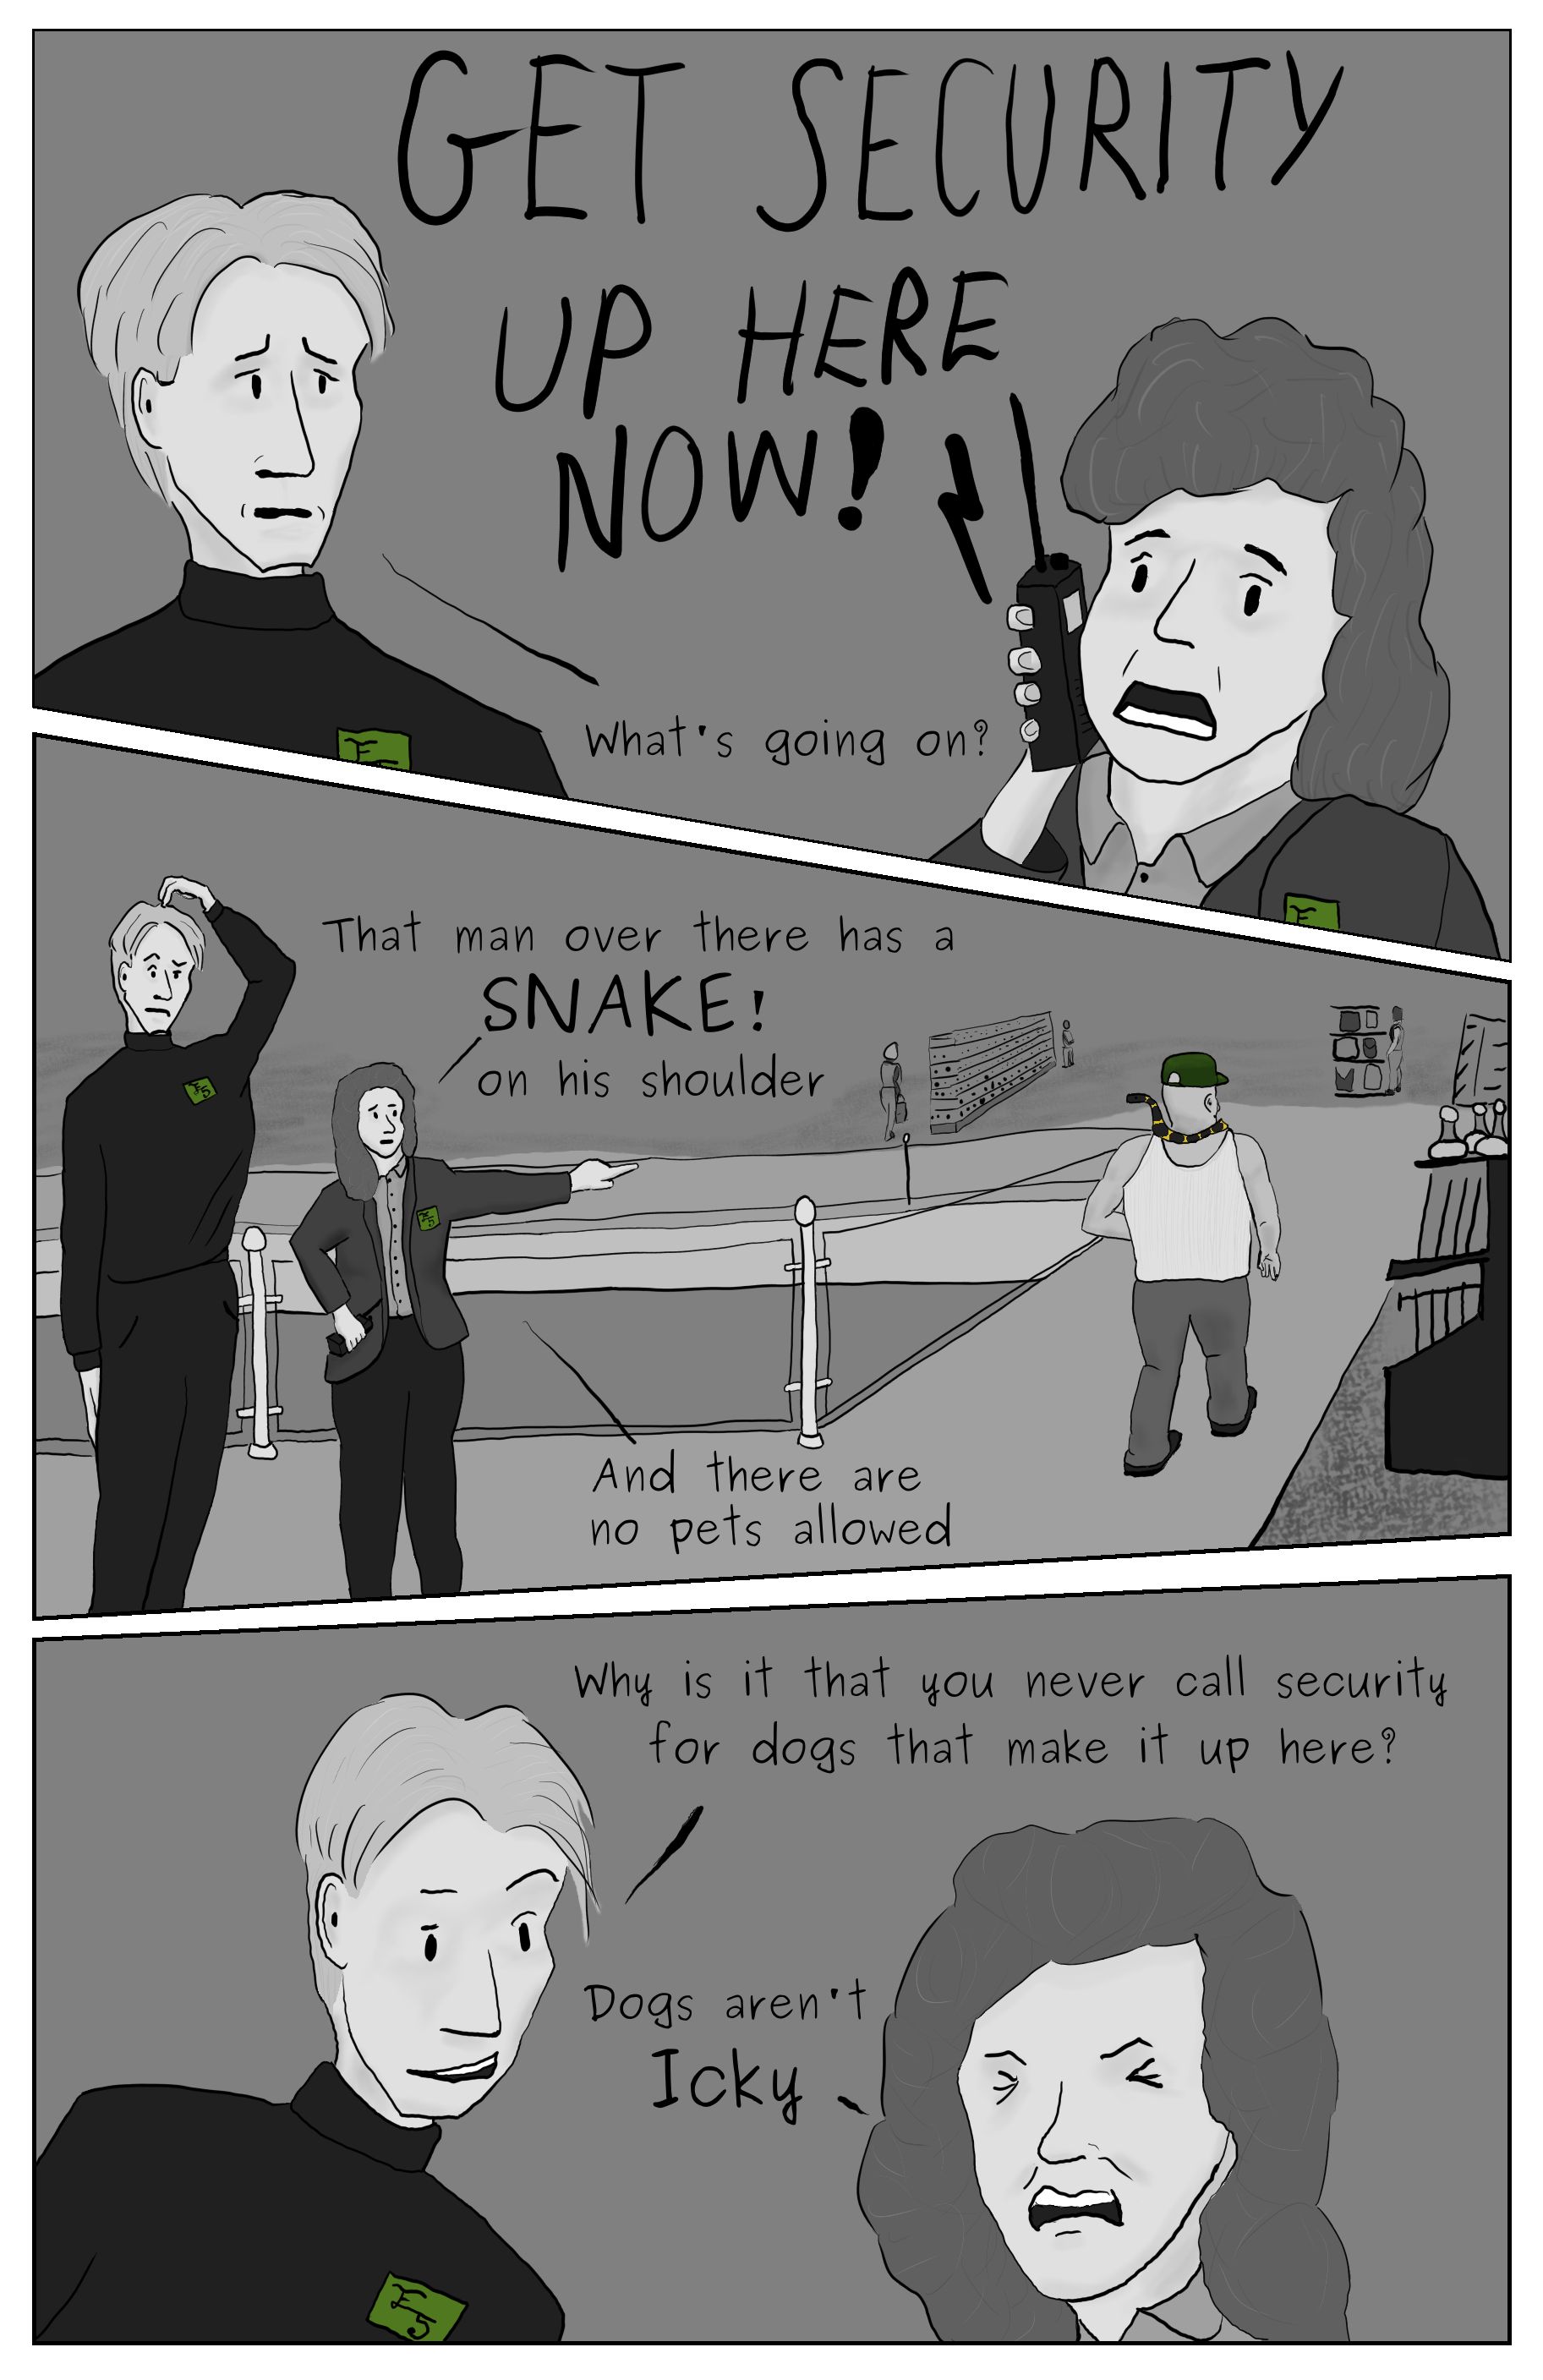 A comic feturing a conversation between Phillp Gerba, and his manager at the fifth avenue store they work at. The conversation is about the manager calling securety about a guest who has brought a snake into the store.